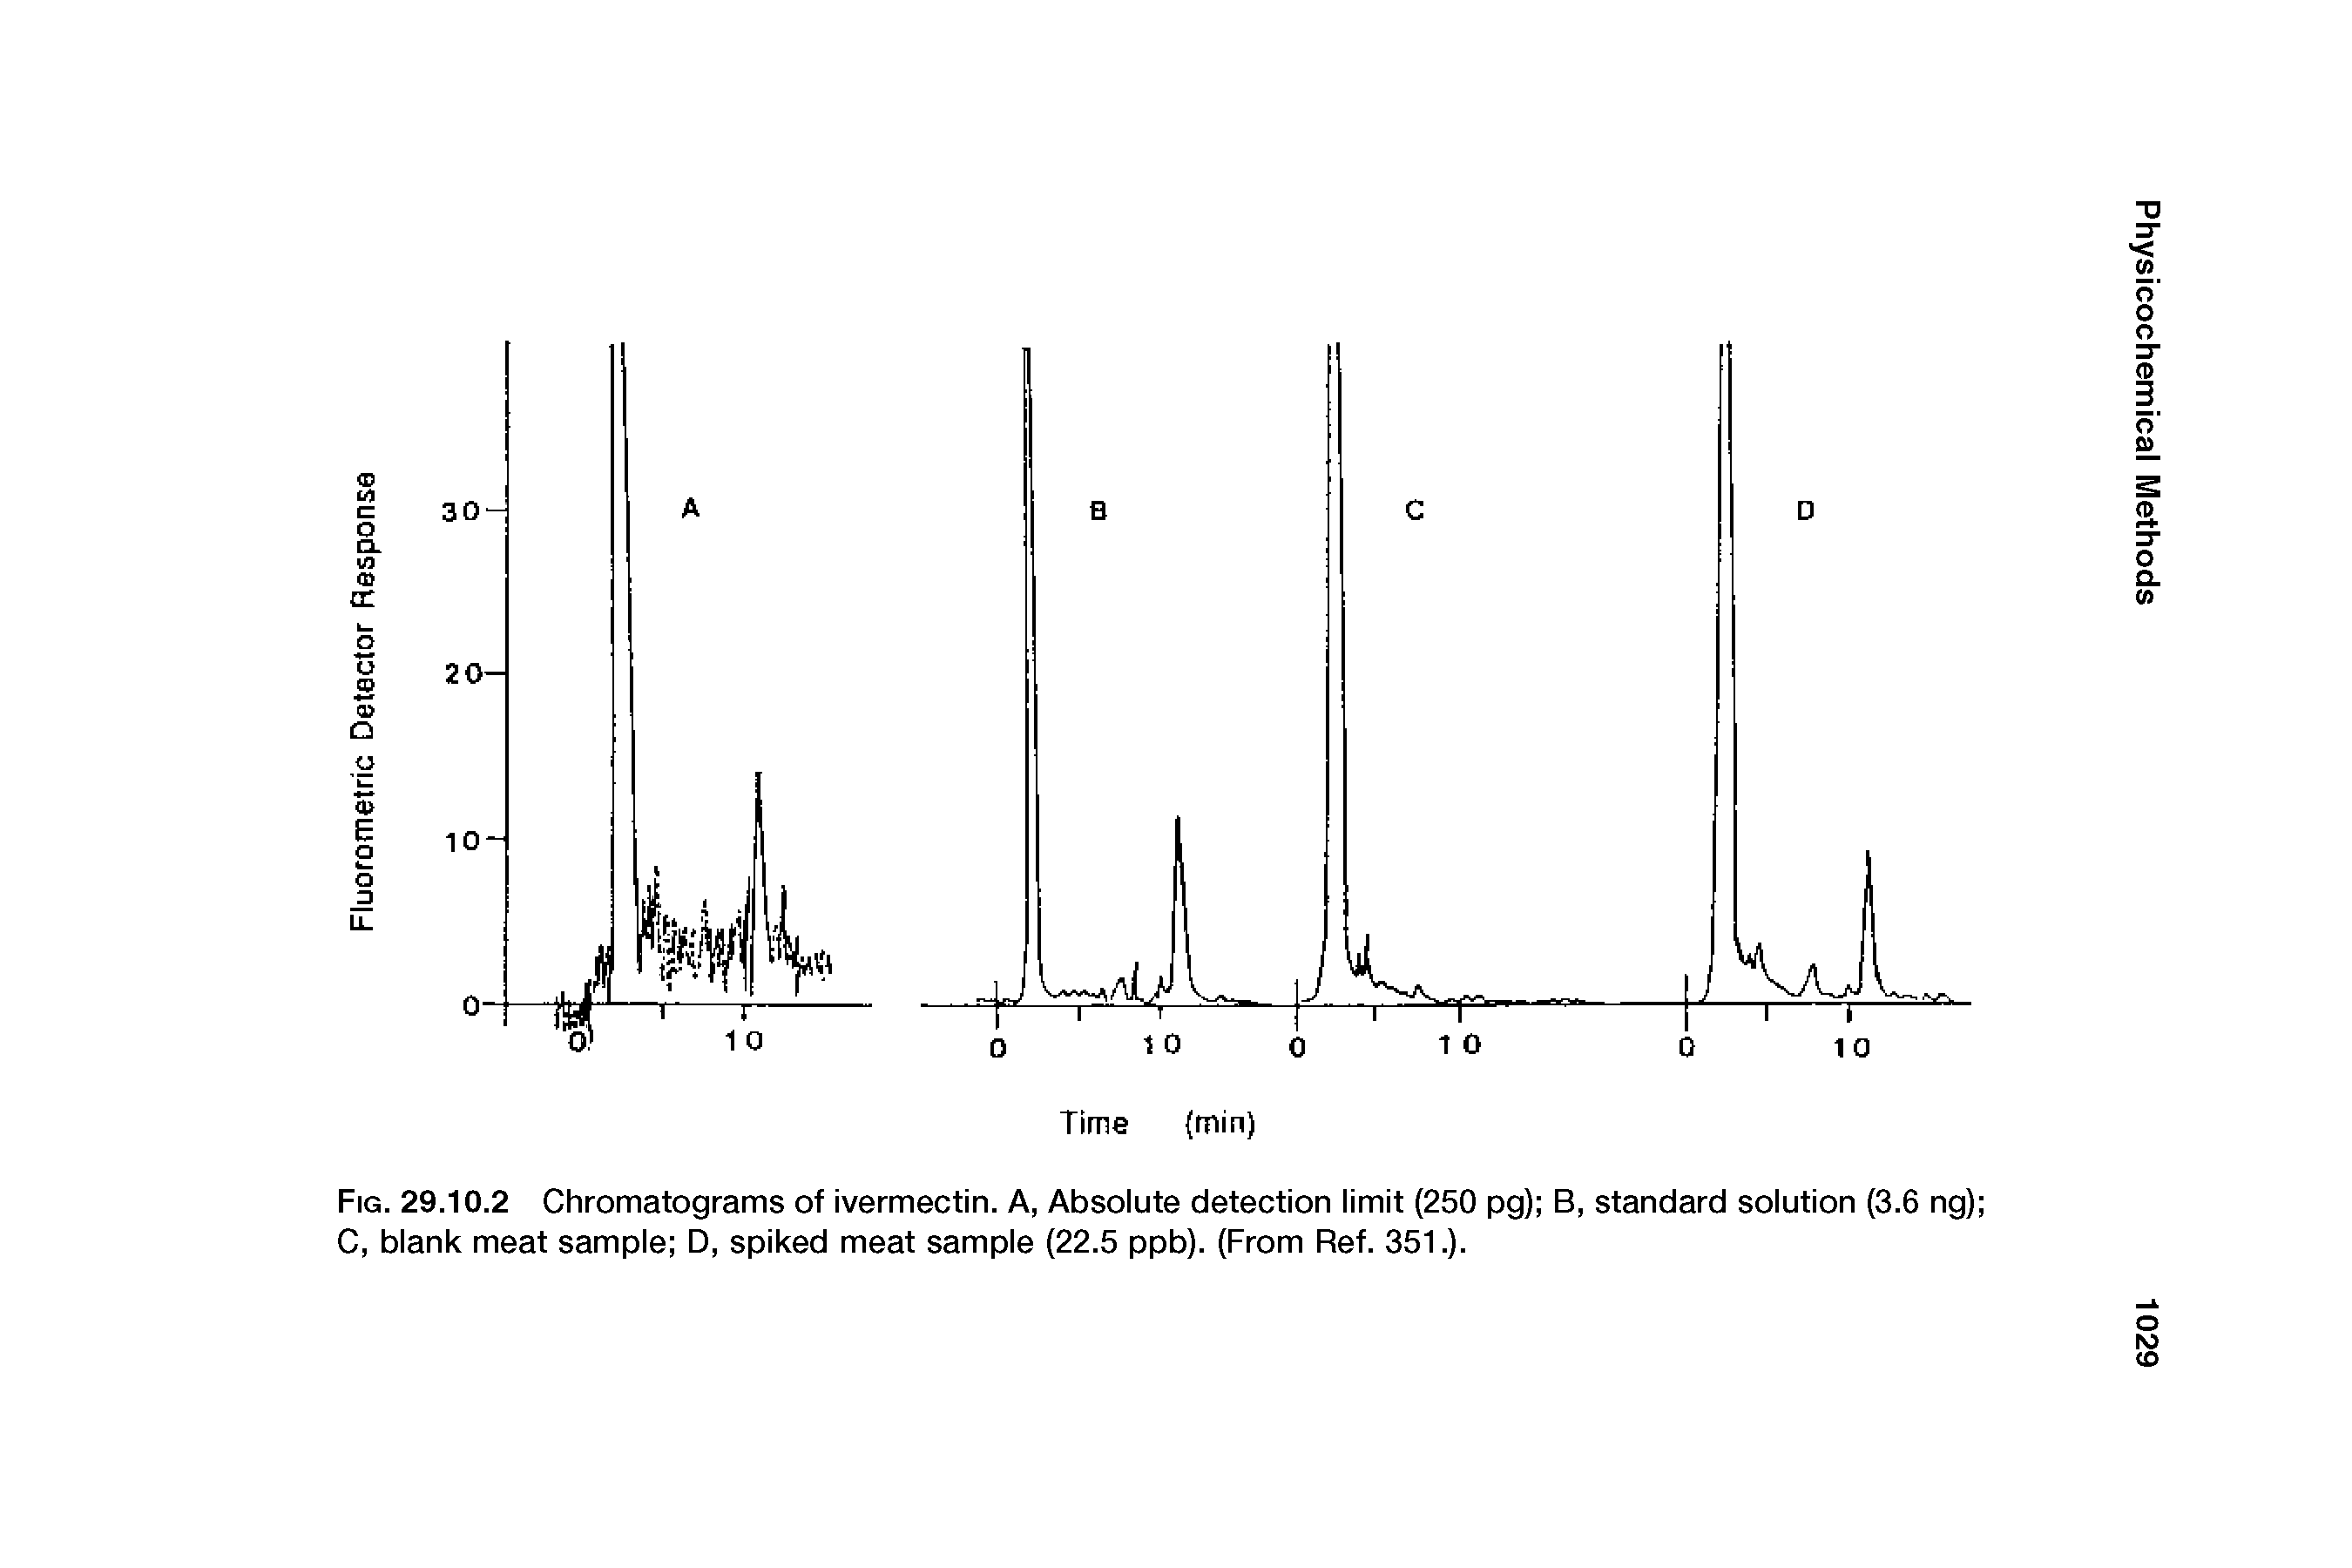 Fig. 29.10.2 Chromatograms of ivermectin. A, Absolute detection limit (250 pg) B, standard solution (3.6 ng) C, blank meat sample D, spiked meat sample (22.5 ppb). (From Ref. 351.).